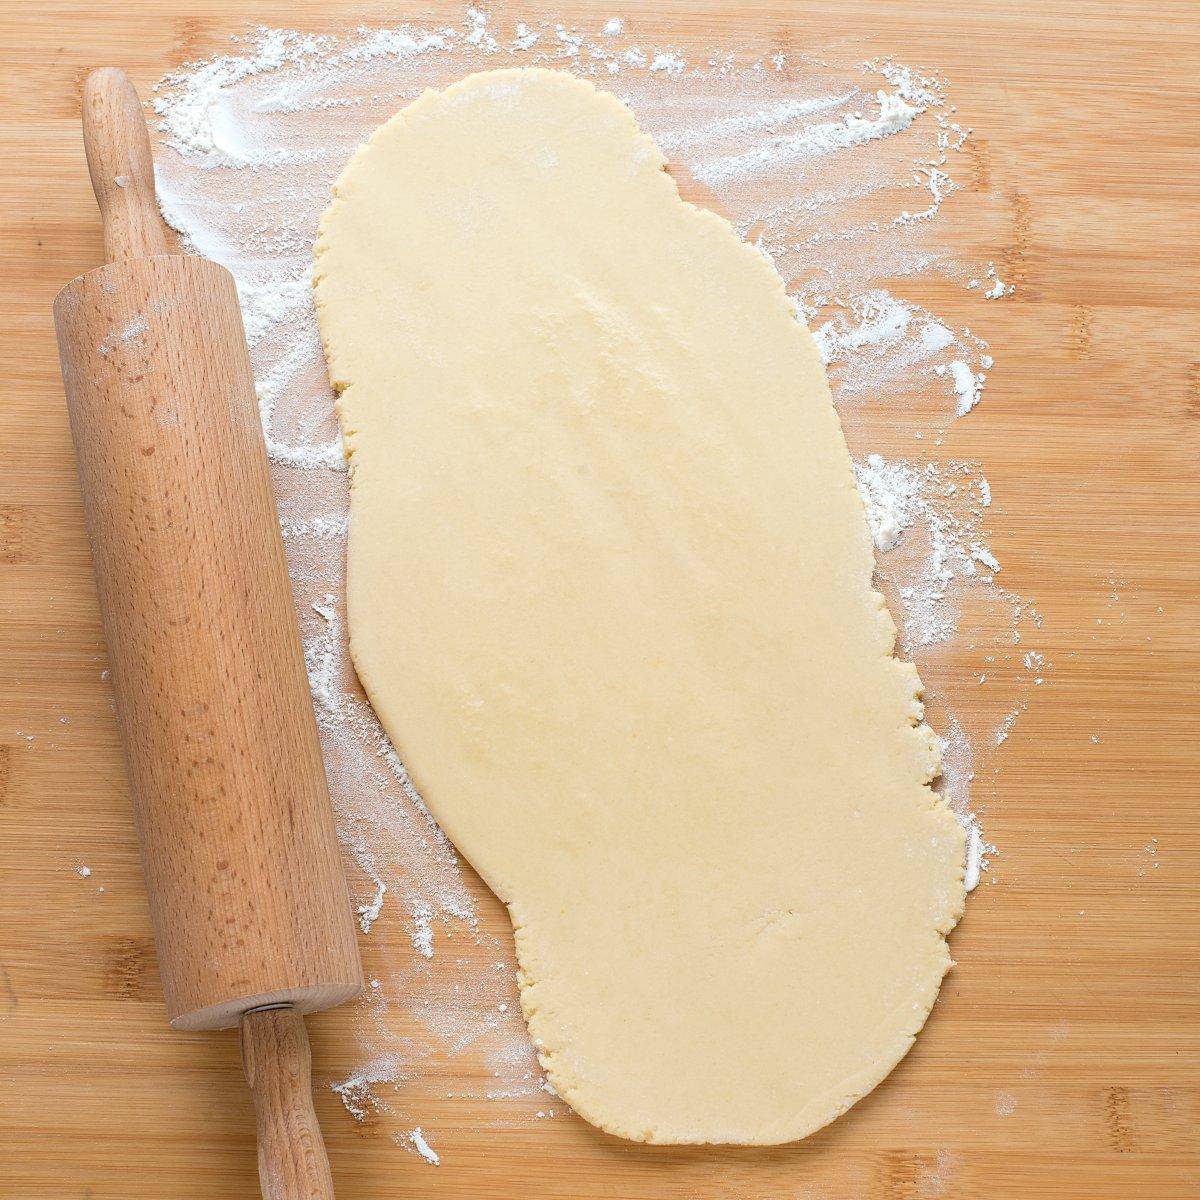 On the floured work surface, honey dough is being rolled out with a rolling pin positioned on the left side.